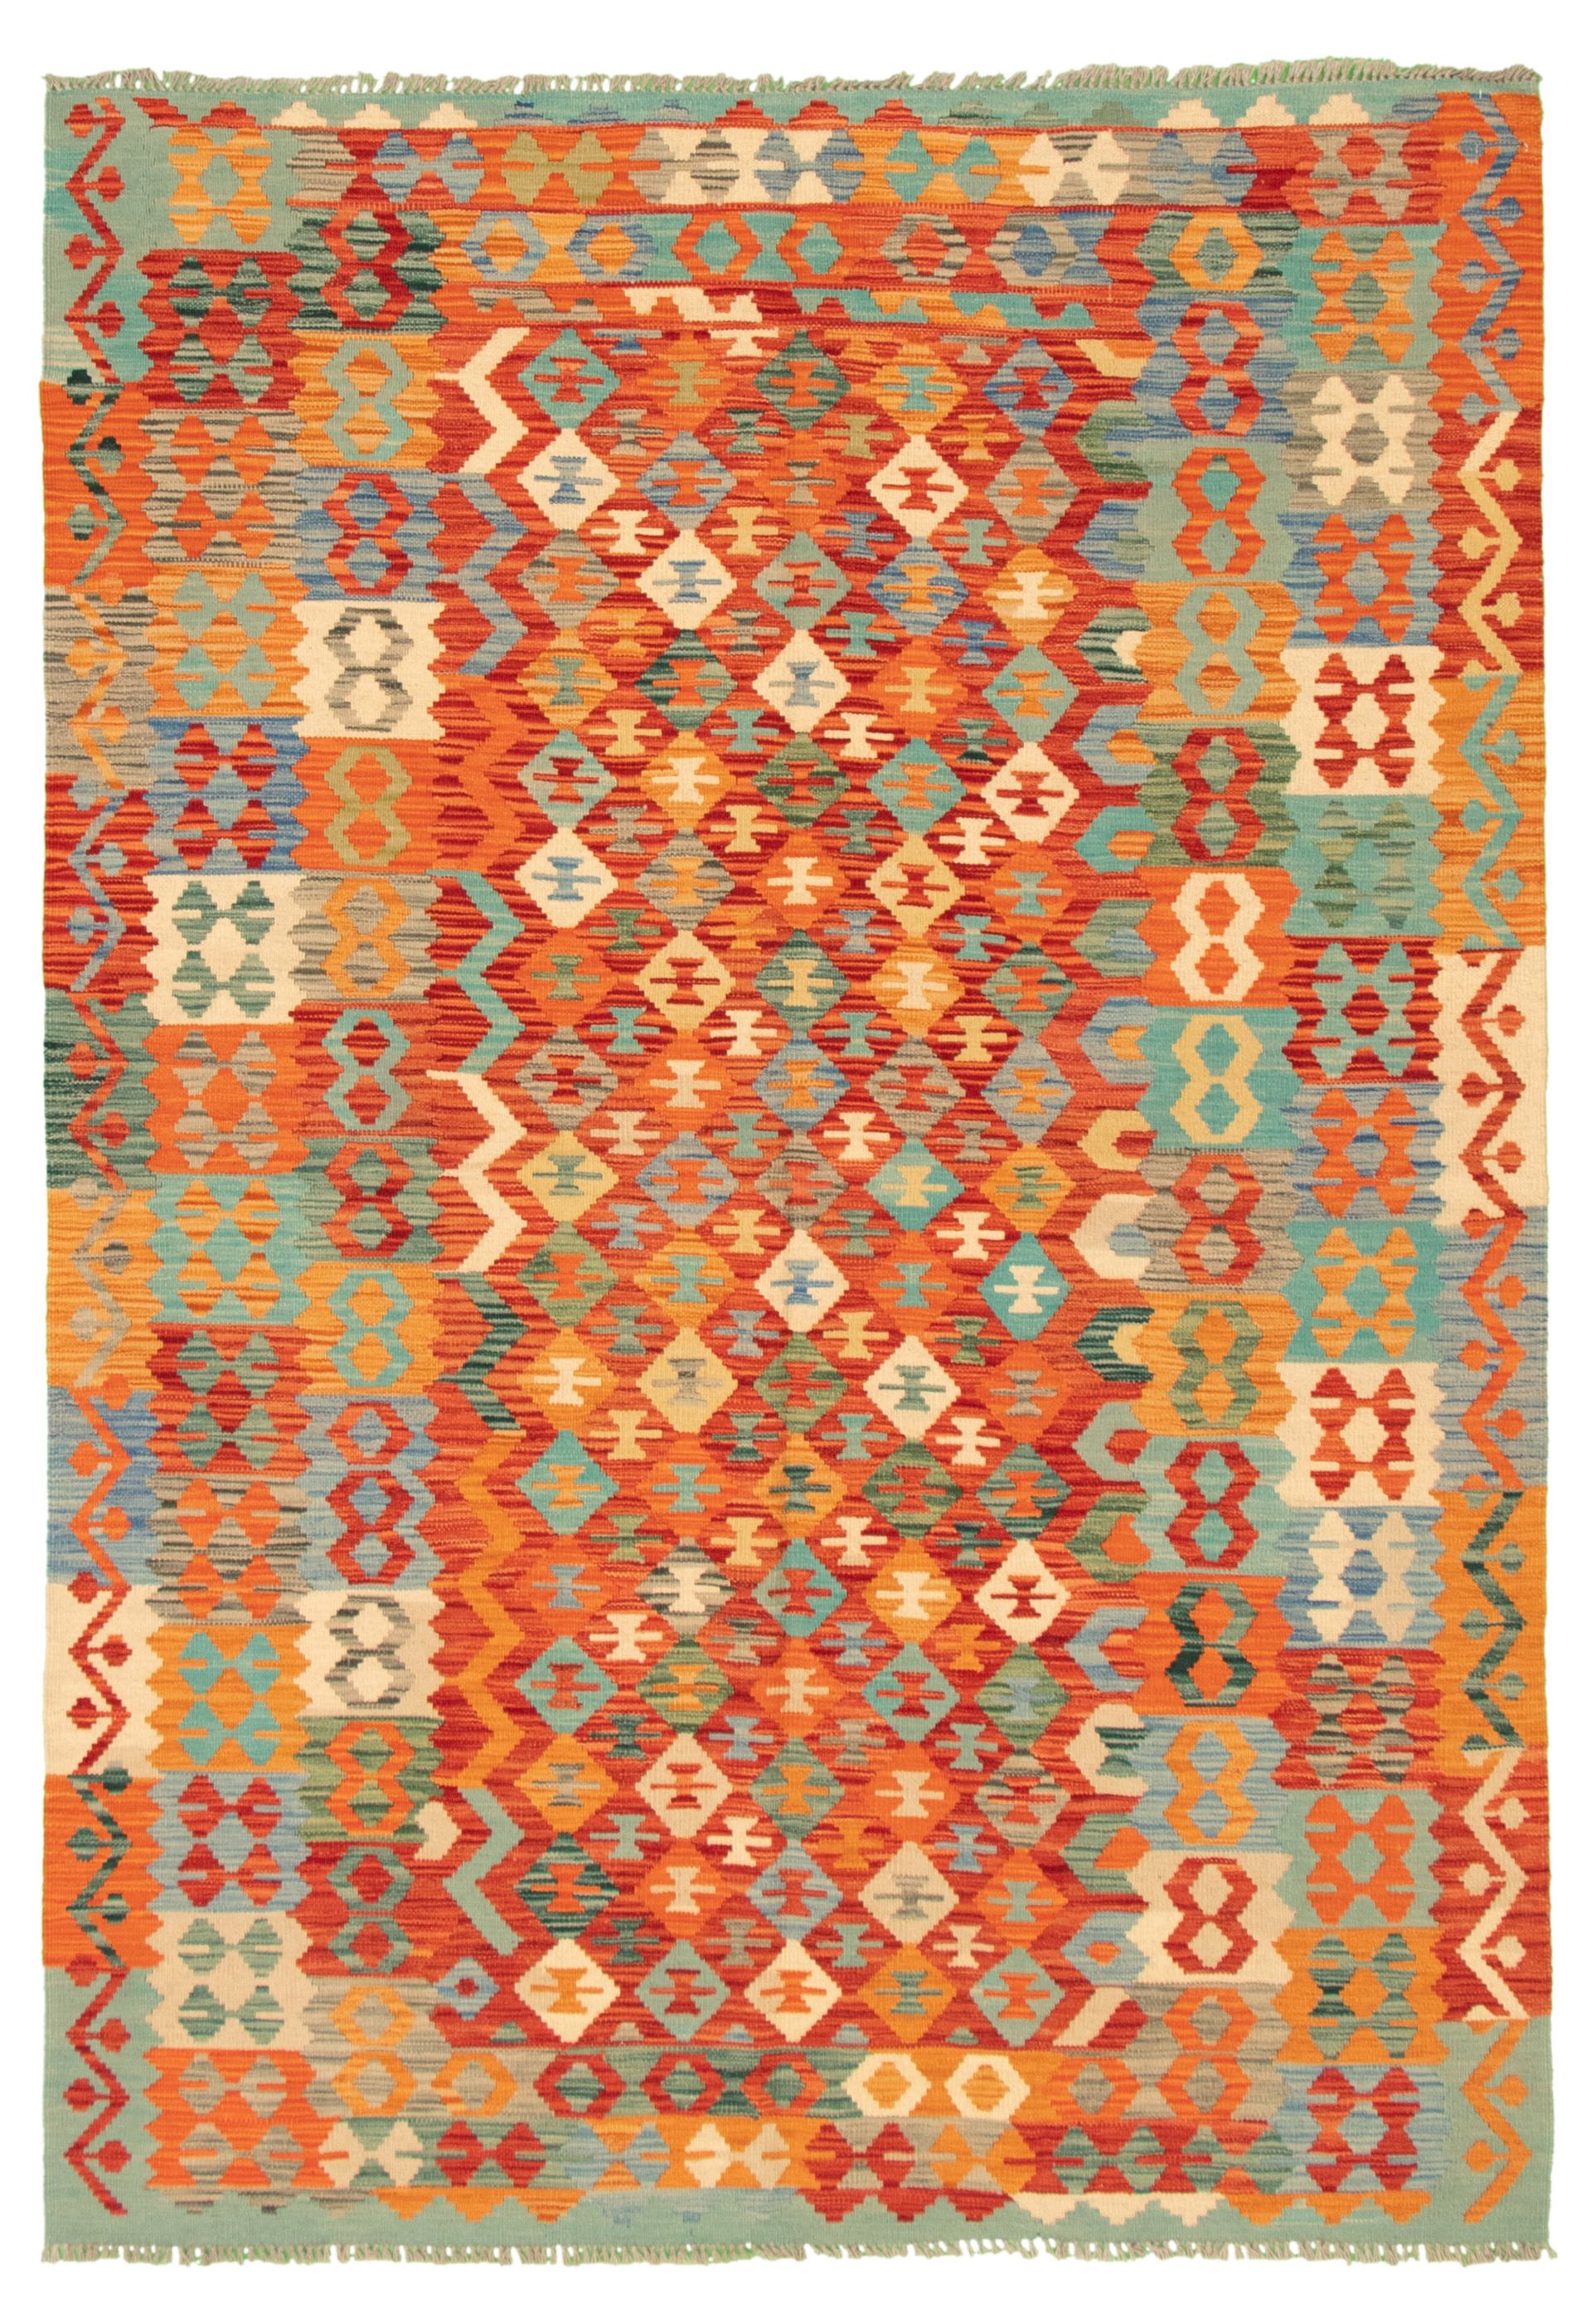 Hand woven Bold and Colorful  Red Wool Kilim 5'7" x 8'1" Size: 5'7" x 8'1"  